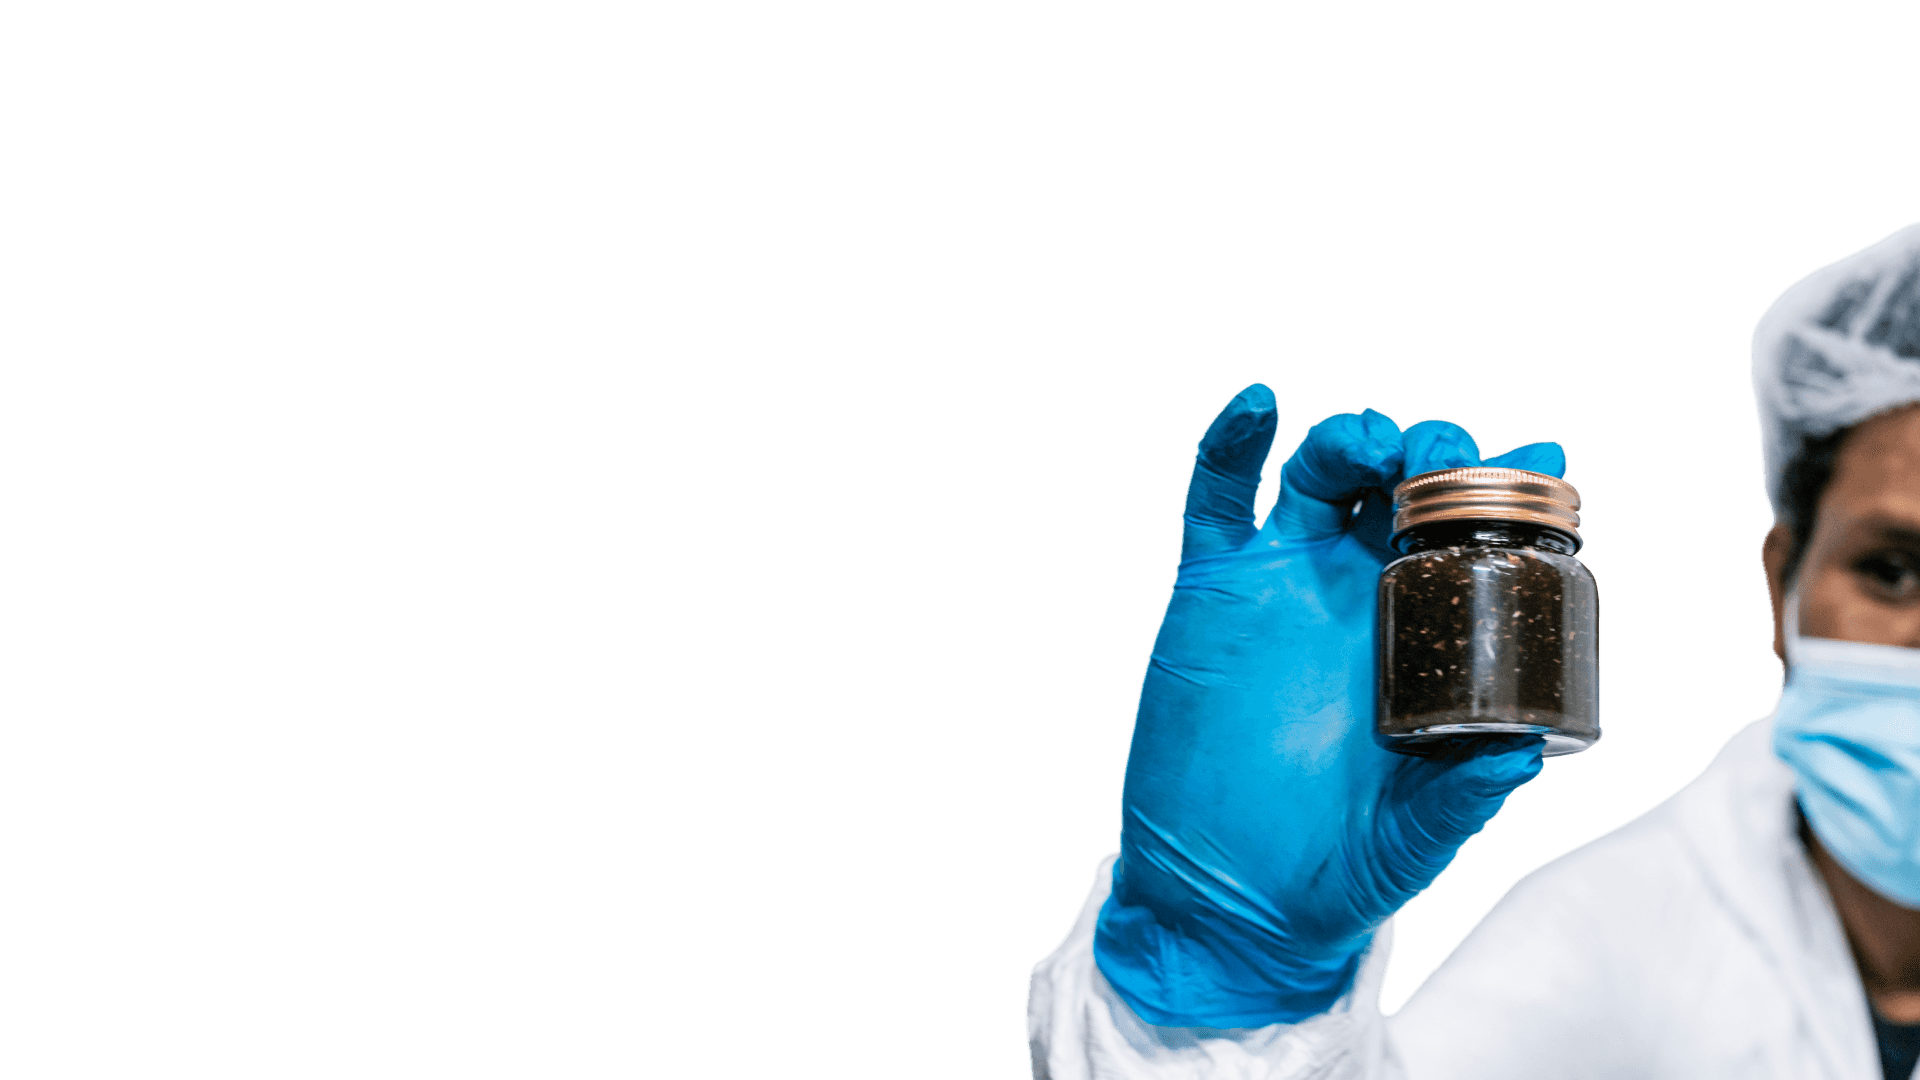 Cancerogenic toxins from contaminated suits in a jar